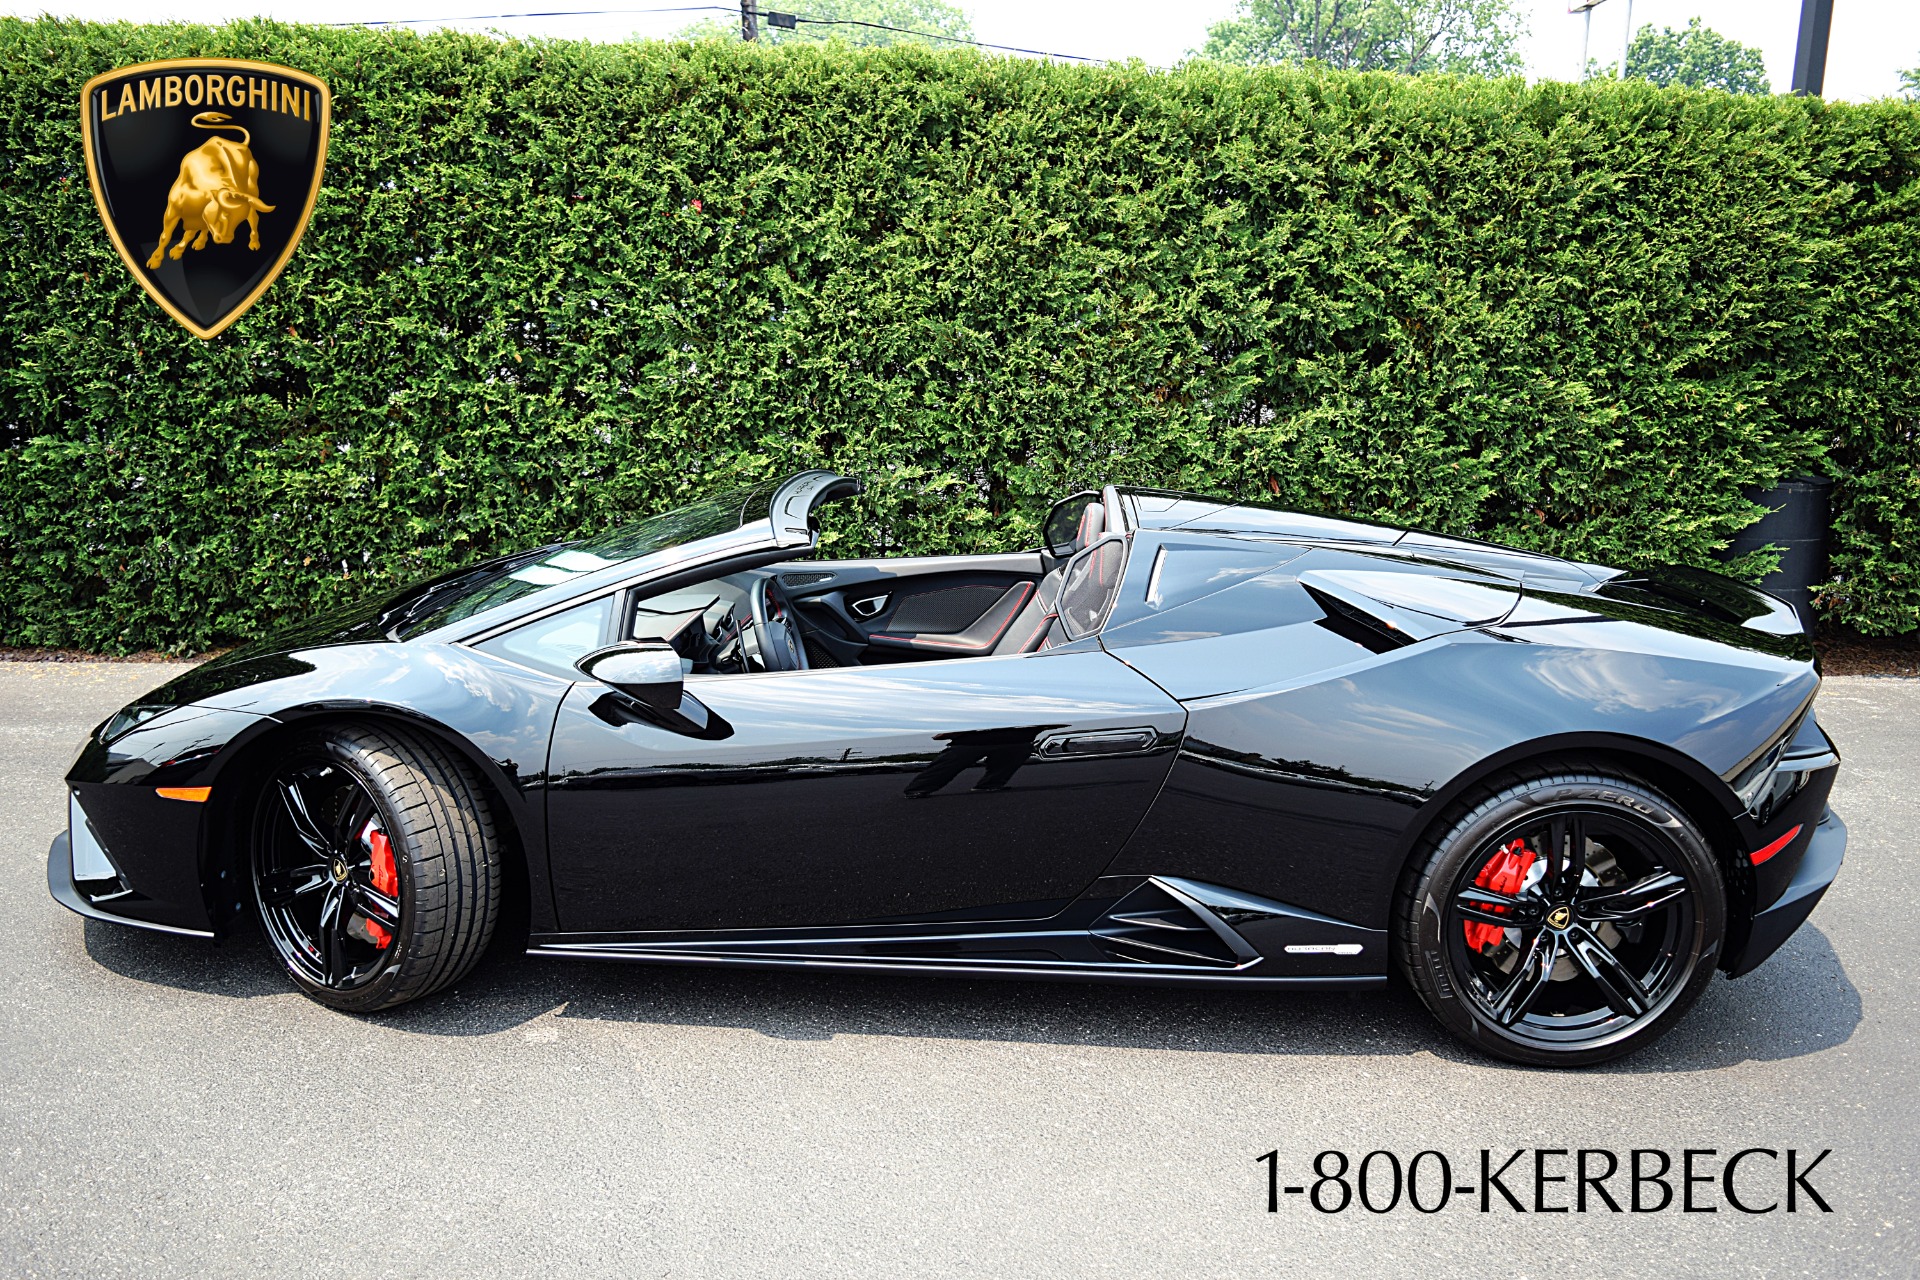 Used 2020 Lamborghini Huracan LP-610-2 EVO Spyder / LEASE OPTIONS AVAILABLE for sale $309,000 at F.C. Kerbeck Aston Martin in Palmyra NJ 08065 2